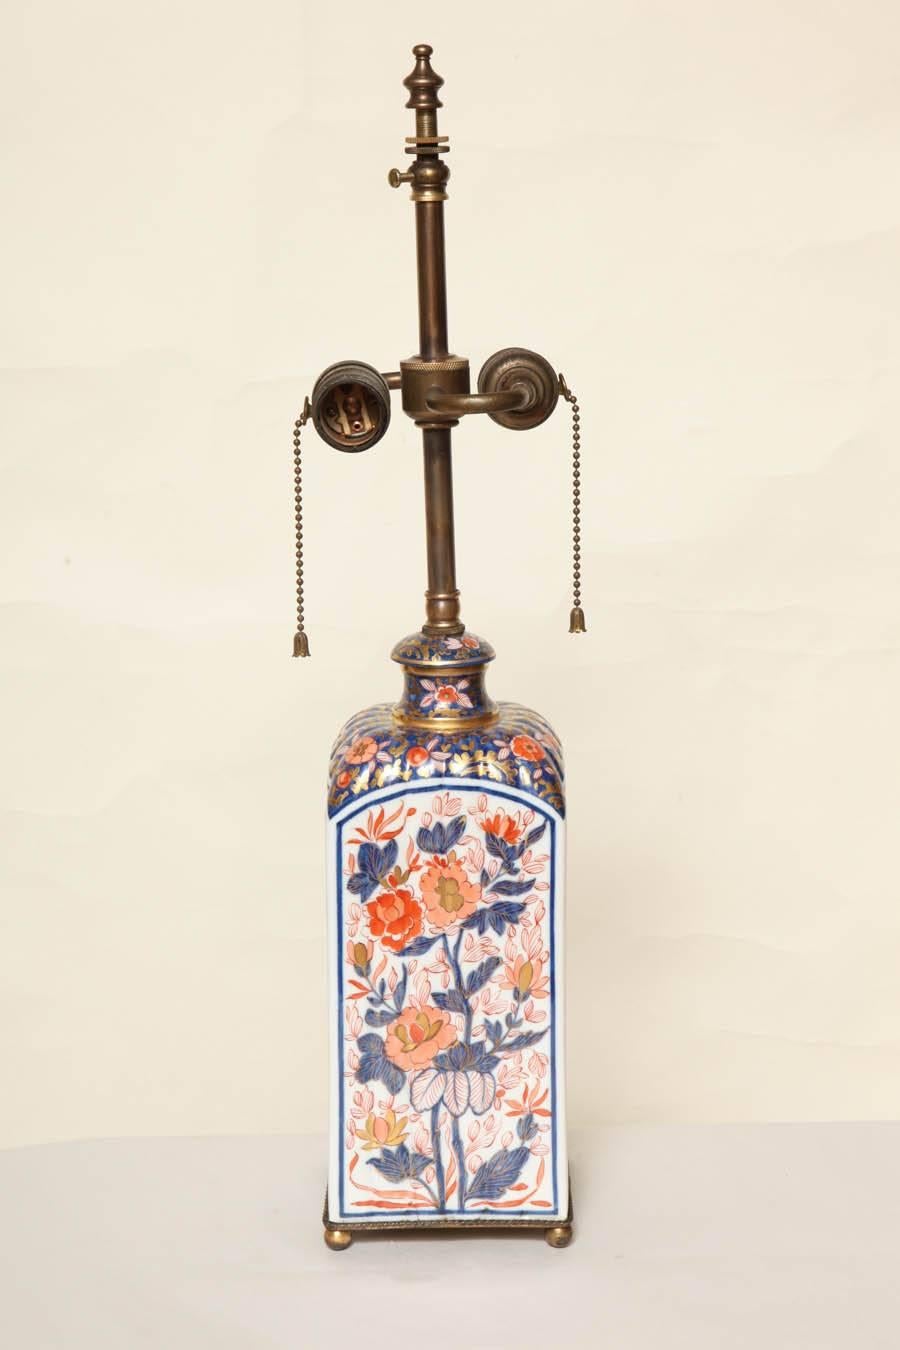 A pair of Japanese Imari square sided sake/wine bottles and covers, now mounted as a pair of two-light table lamps, early 19th century. Featuring a ribbed surface and each panel decorated with flowering trees in the Imari red and cobalt blue